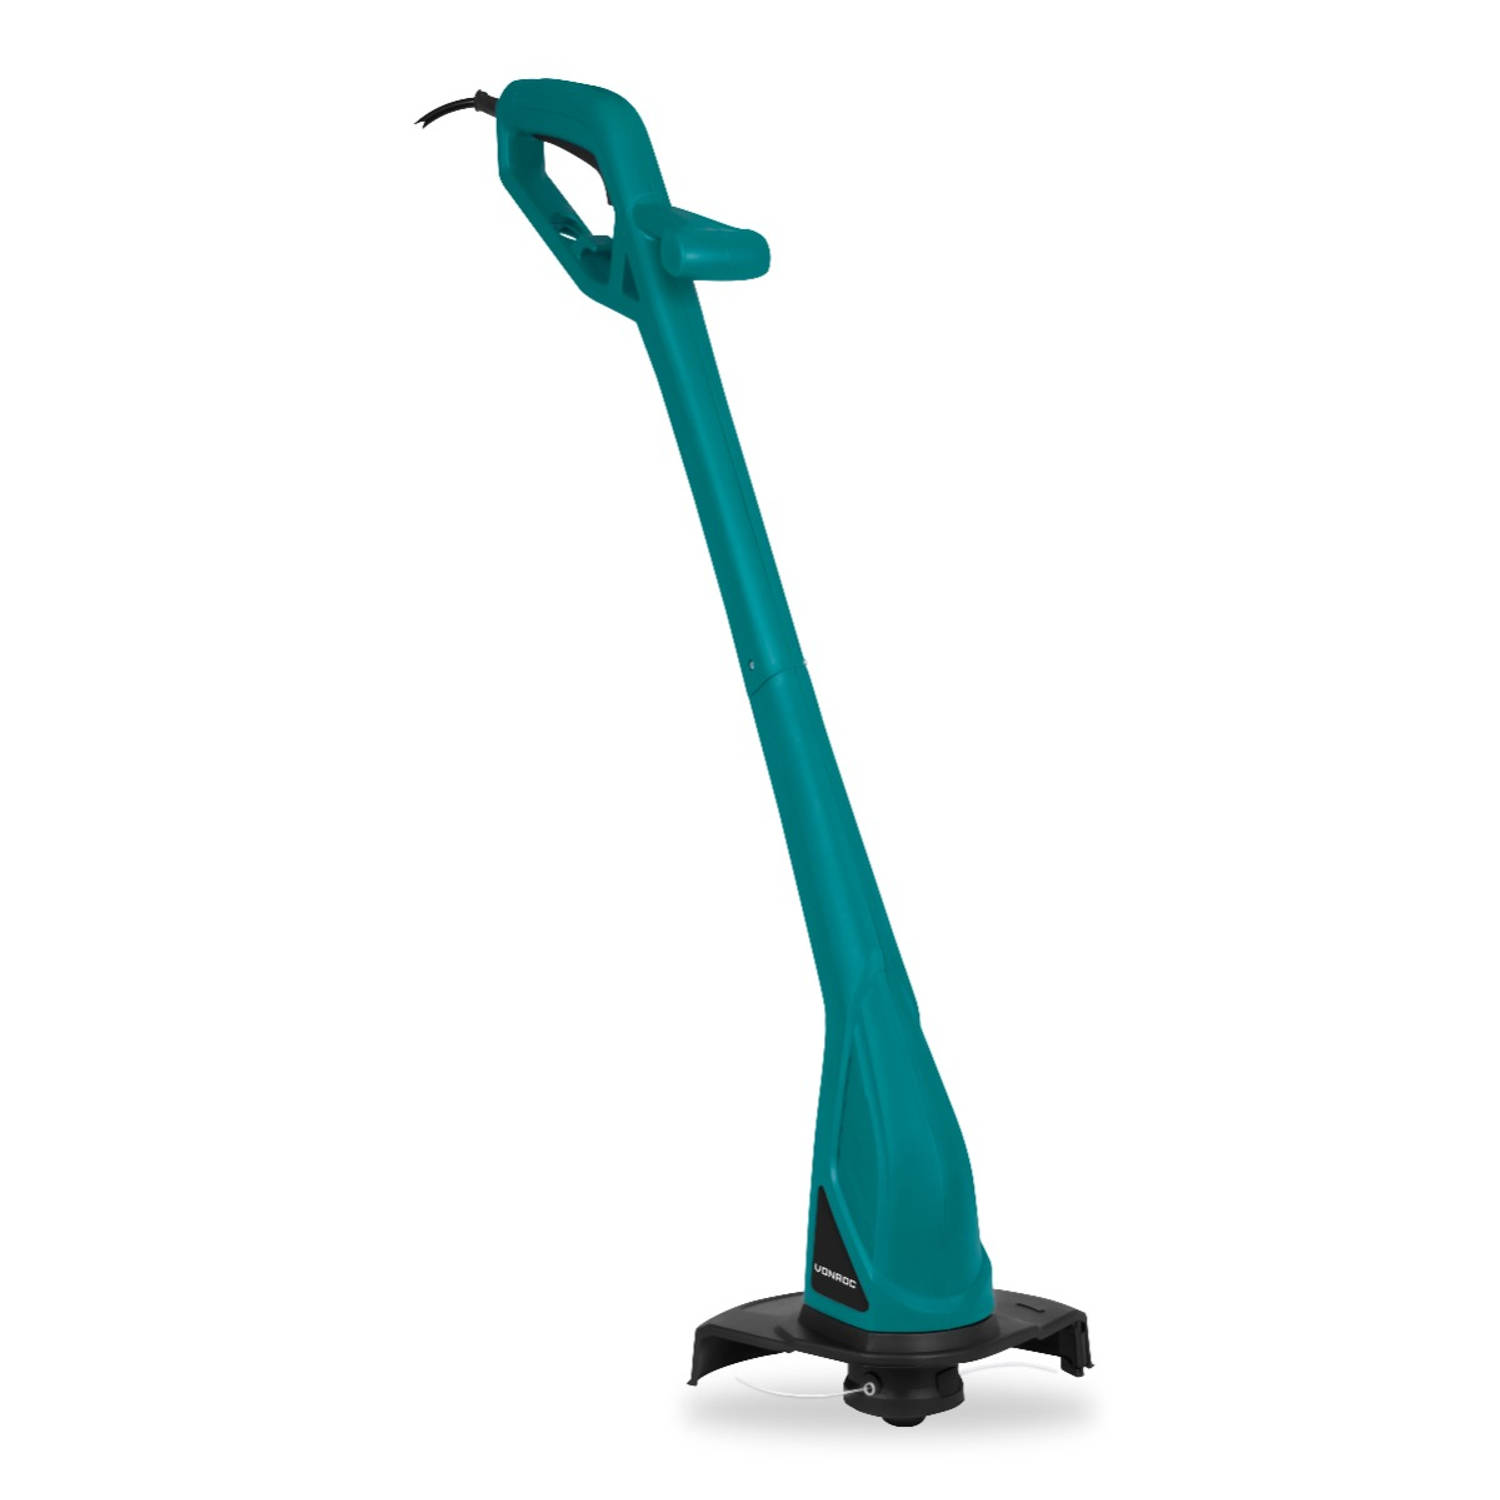 Vonroc Grastrimmer 300w Ø230mm Maaidiameter Incl. 4m Draadspoel Tap And Go Systeem